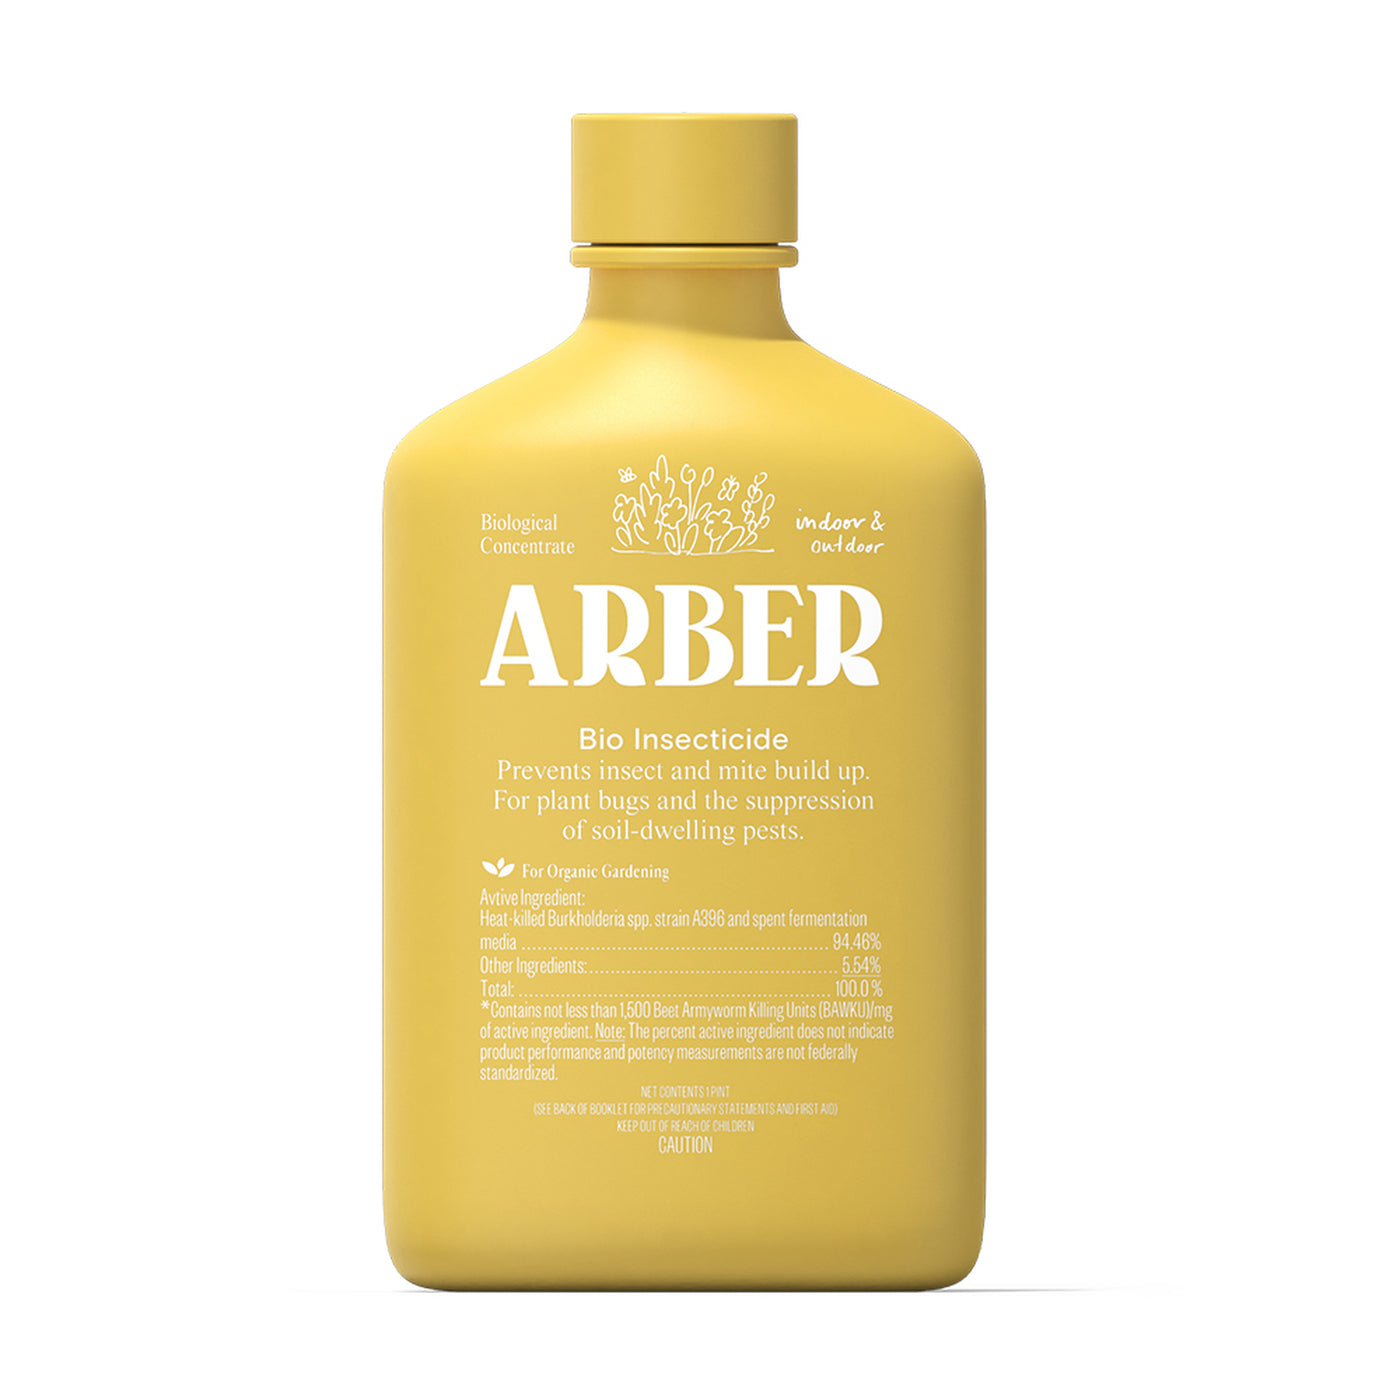 Arber Bio Insecticide 8oz Concentrate